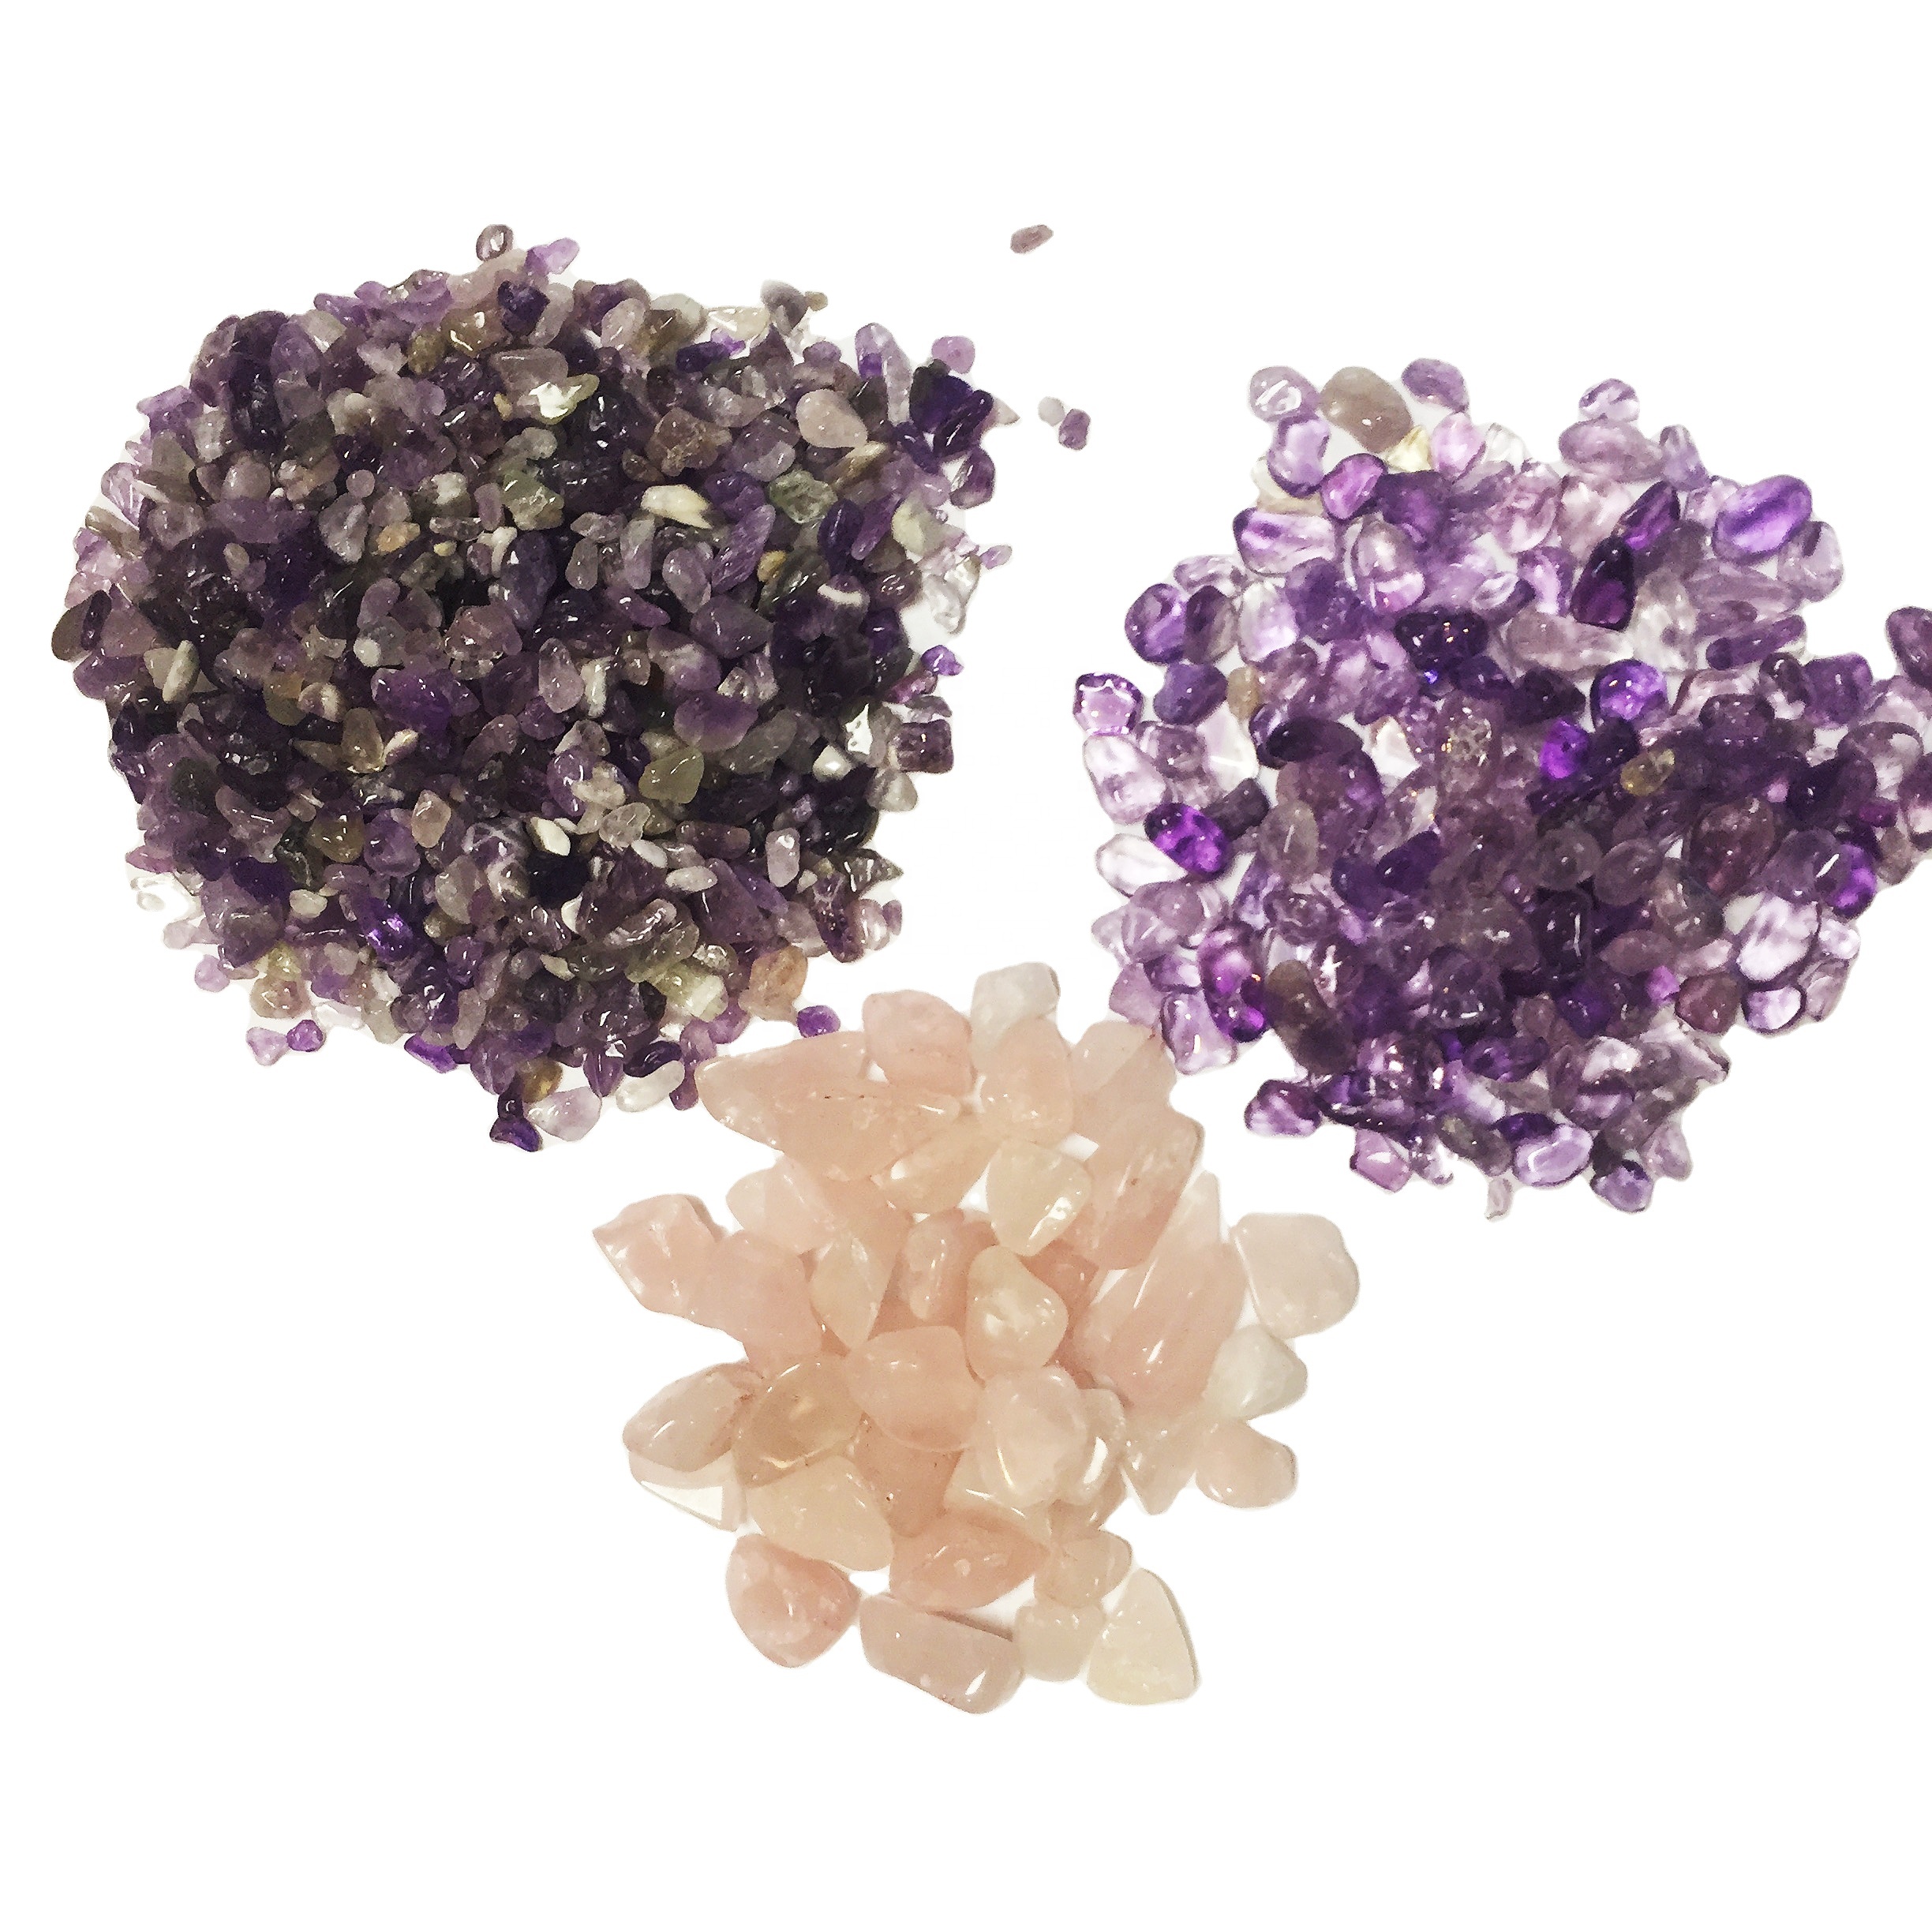 Degaussing stone Amethyst Crushed Stone, Great Quality and Price